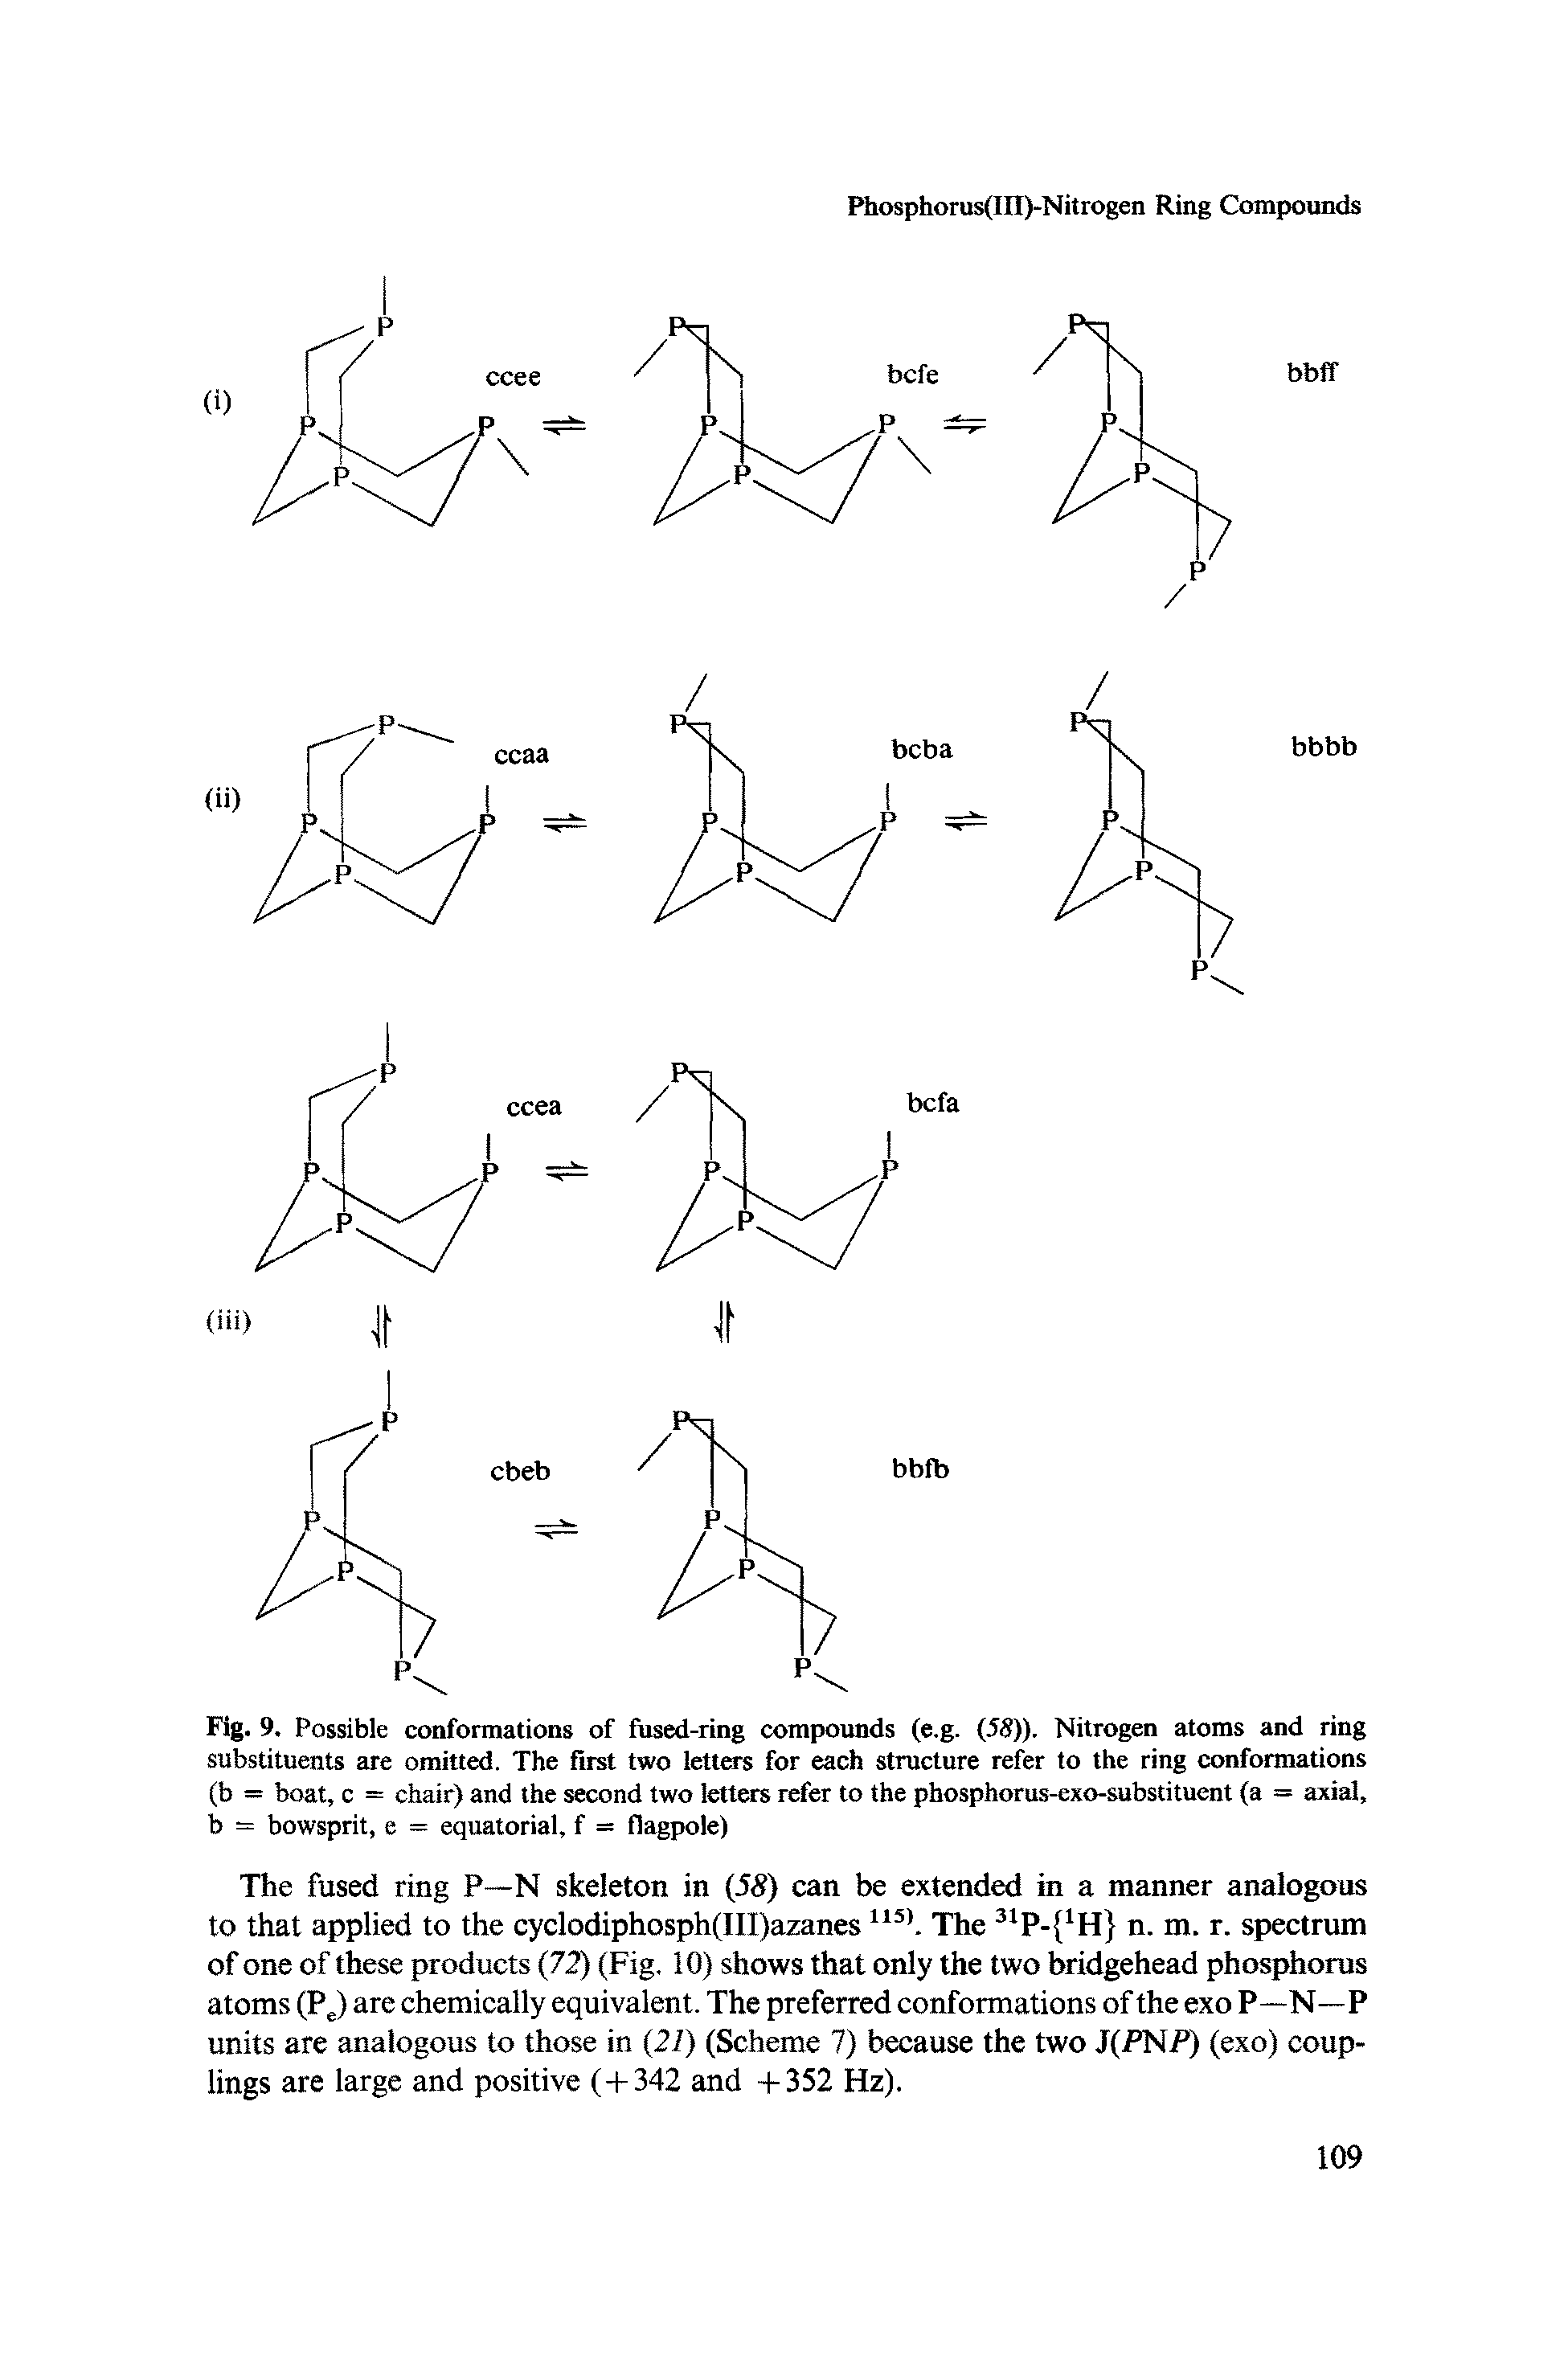 Fig. 9. Possible conformations of fused-ring compounds (e.g. (58)). Nitrogen atoms and ring substituents are omitted. The first two letters for each structure refer to the ring conformations (b = boat, c = chair) and the second two letters refer to the phosphorus-exo-substituent (a = axial, b = bowsprit, e = equatorial, f = flagpole)...